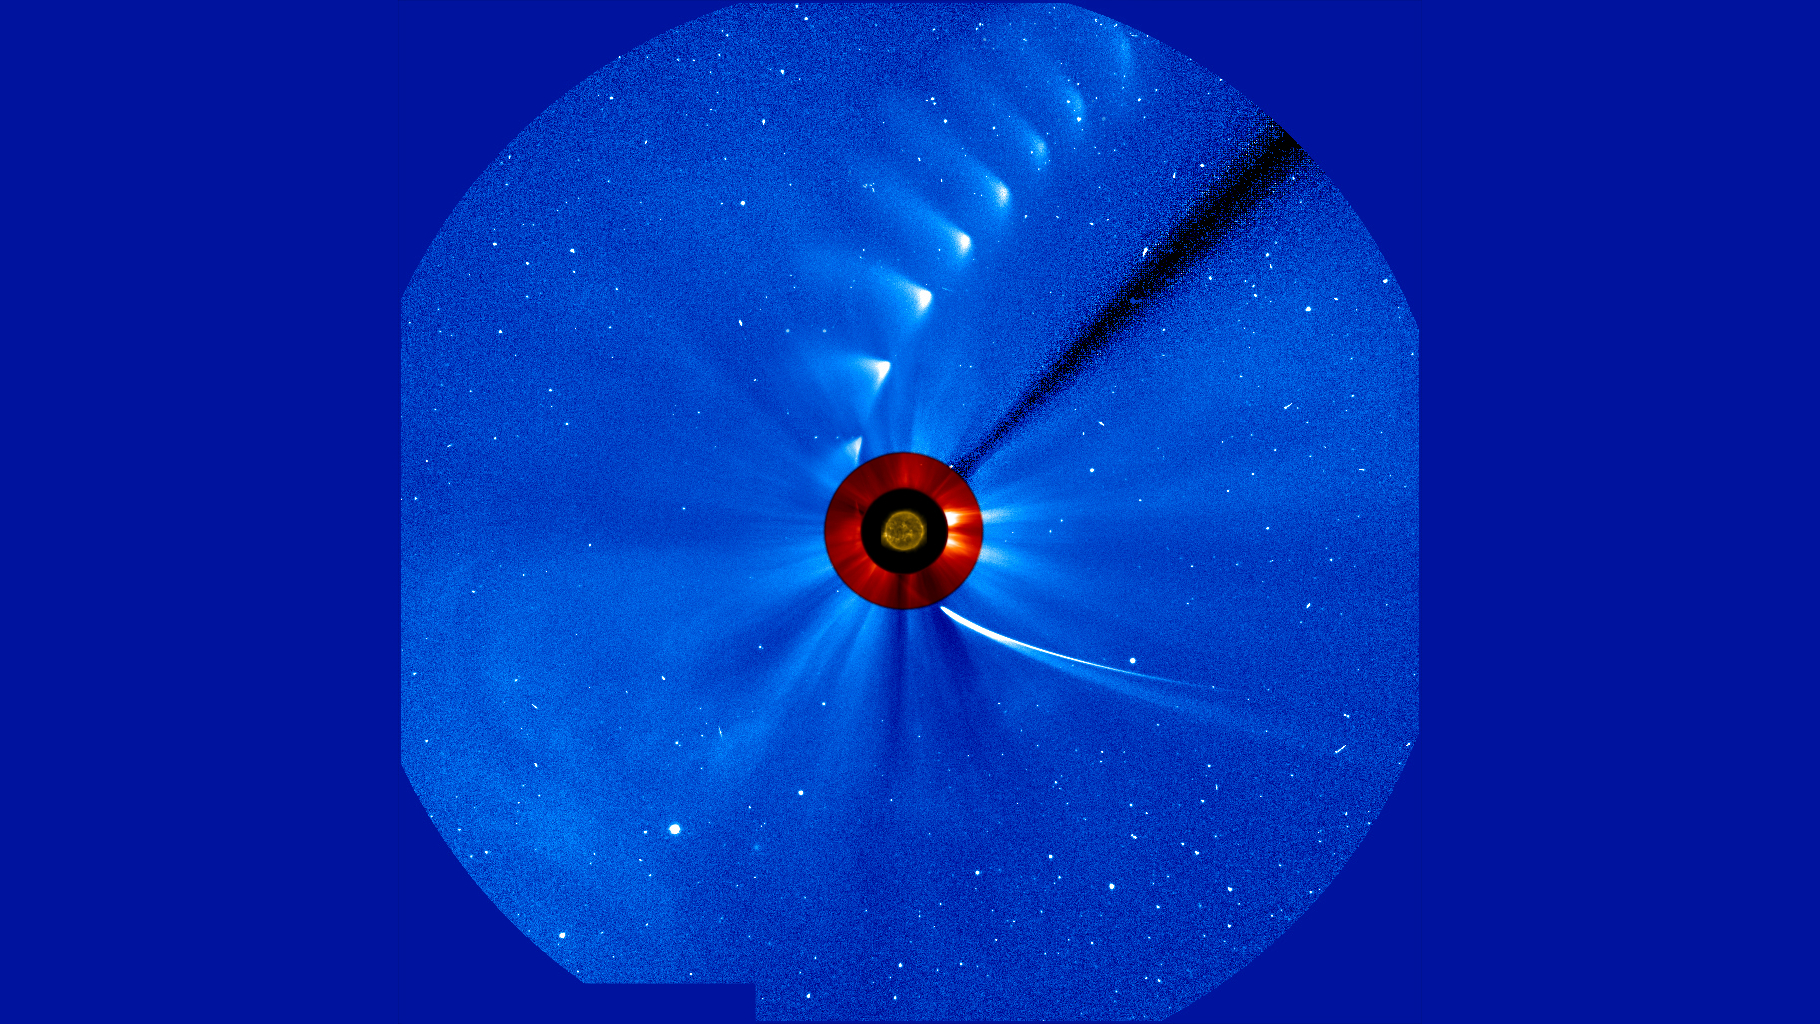 Comet ISON appears from the bottom right of the image and sweets up towards the upper right. The striking image was captured by the ESA/NASA Solar and Heliospheric Observatory with an image of the sun at the center from NASA’s Solar Dynamics Observatory.